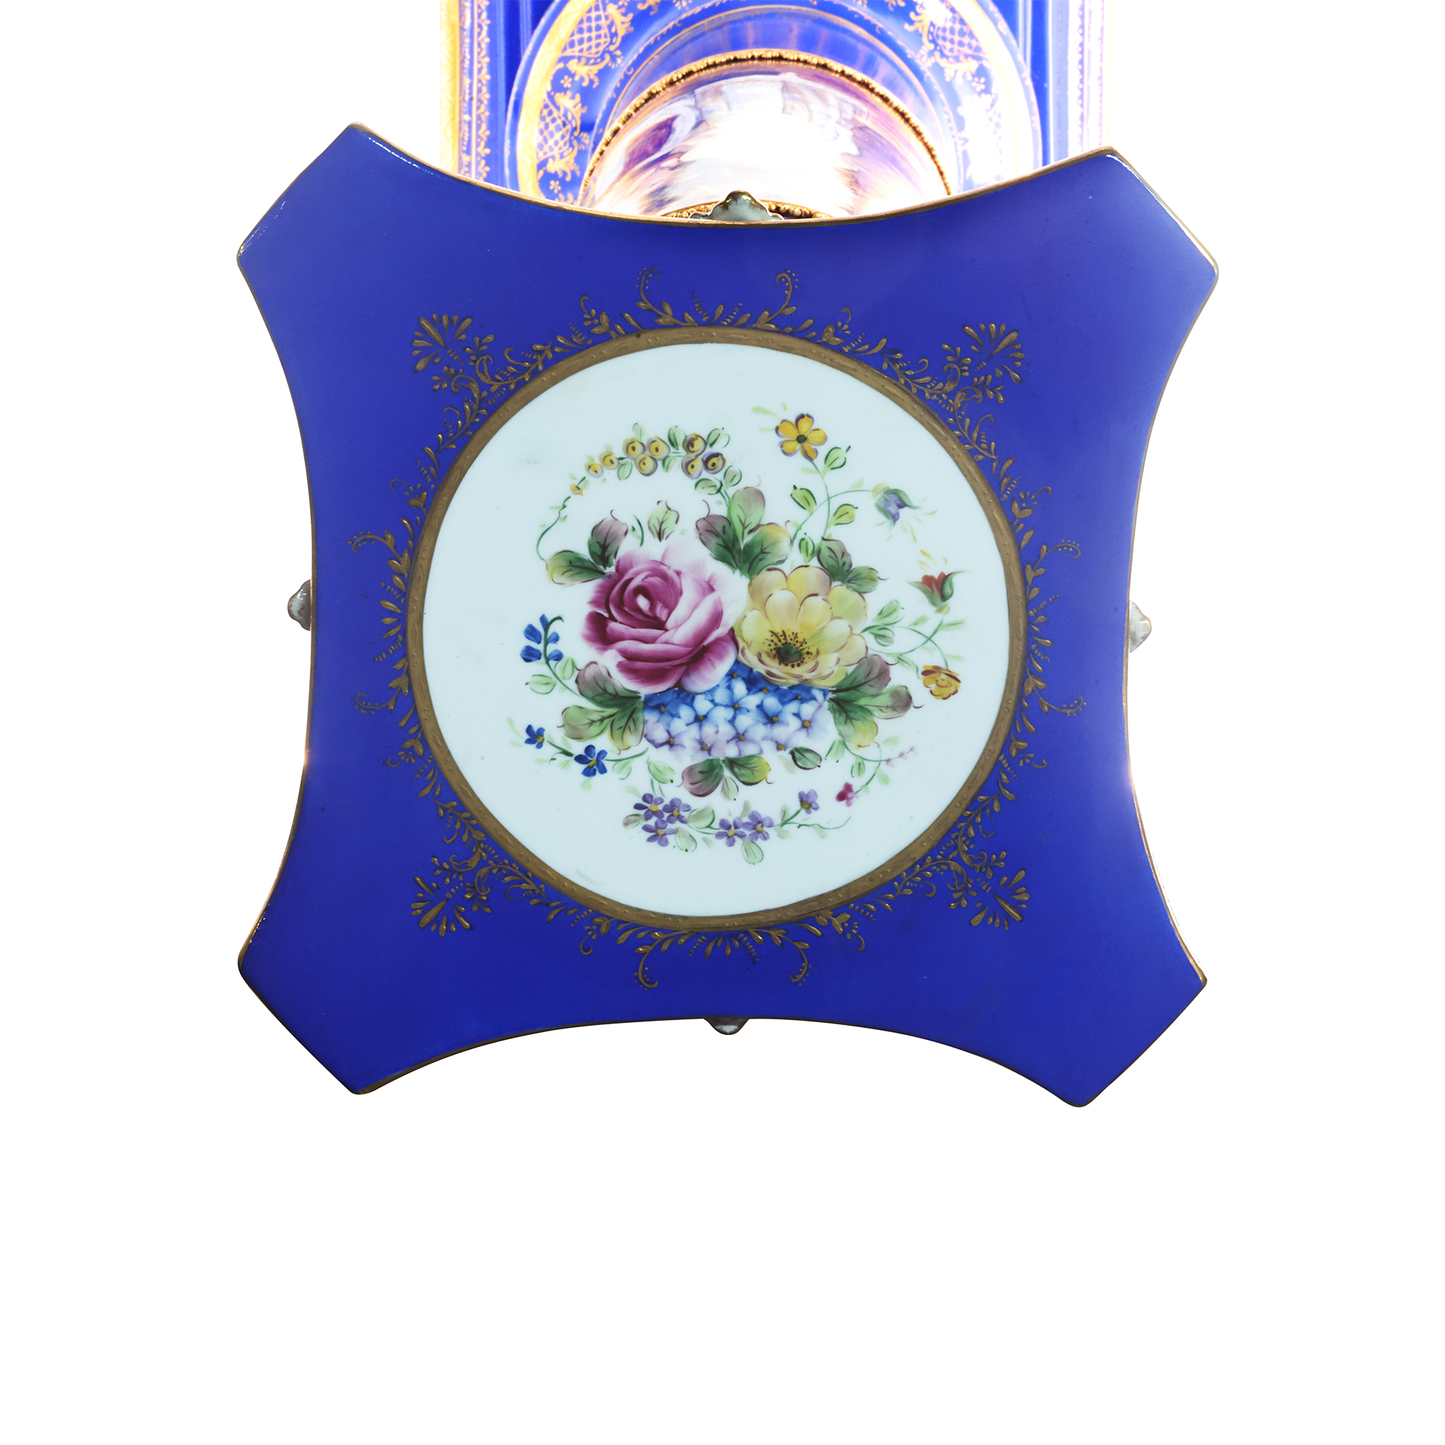 Baroque Style Porcelain Hand-Painted Pedestals in Blue